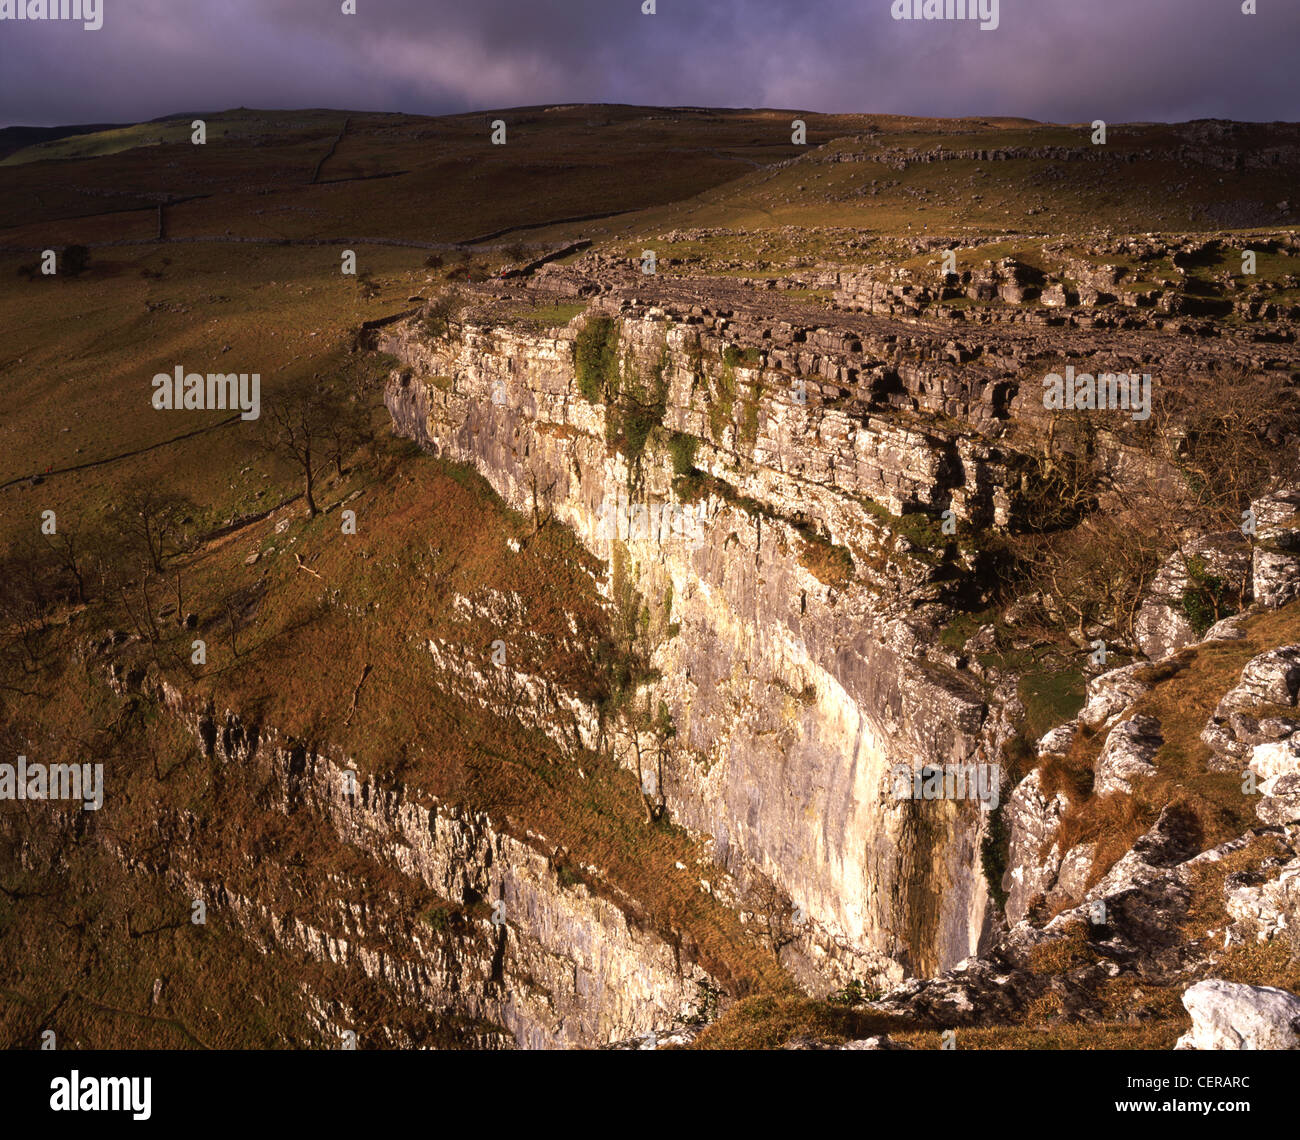 The impressive limestone cliffs at Malham Cove. They are one of the scenic wonders of England. Stock Photo